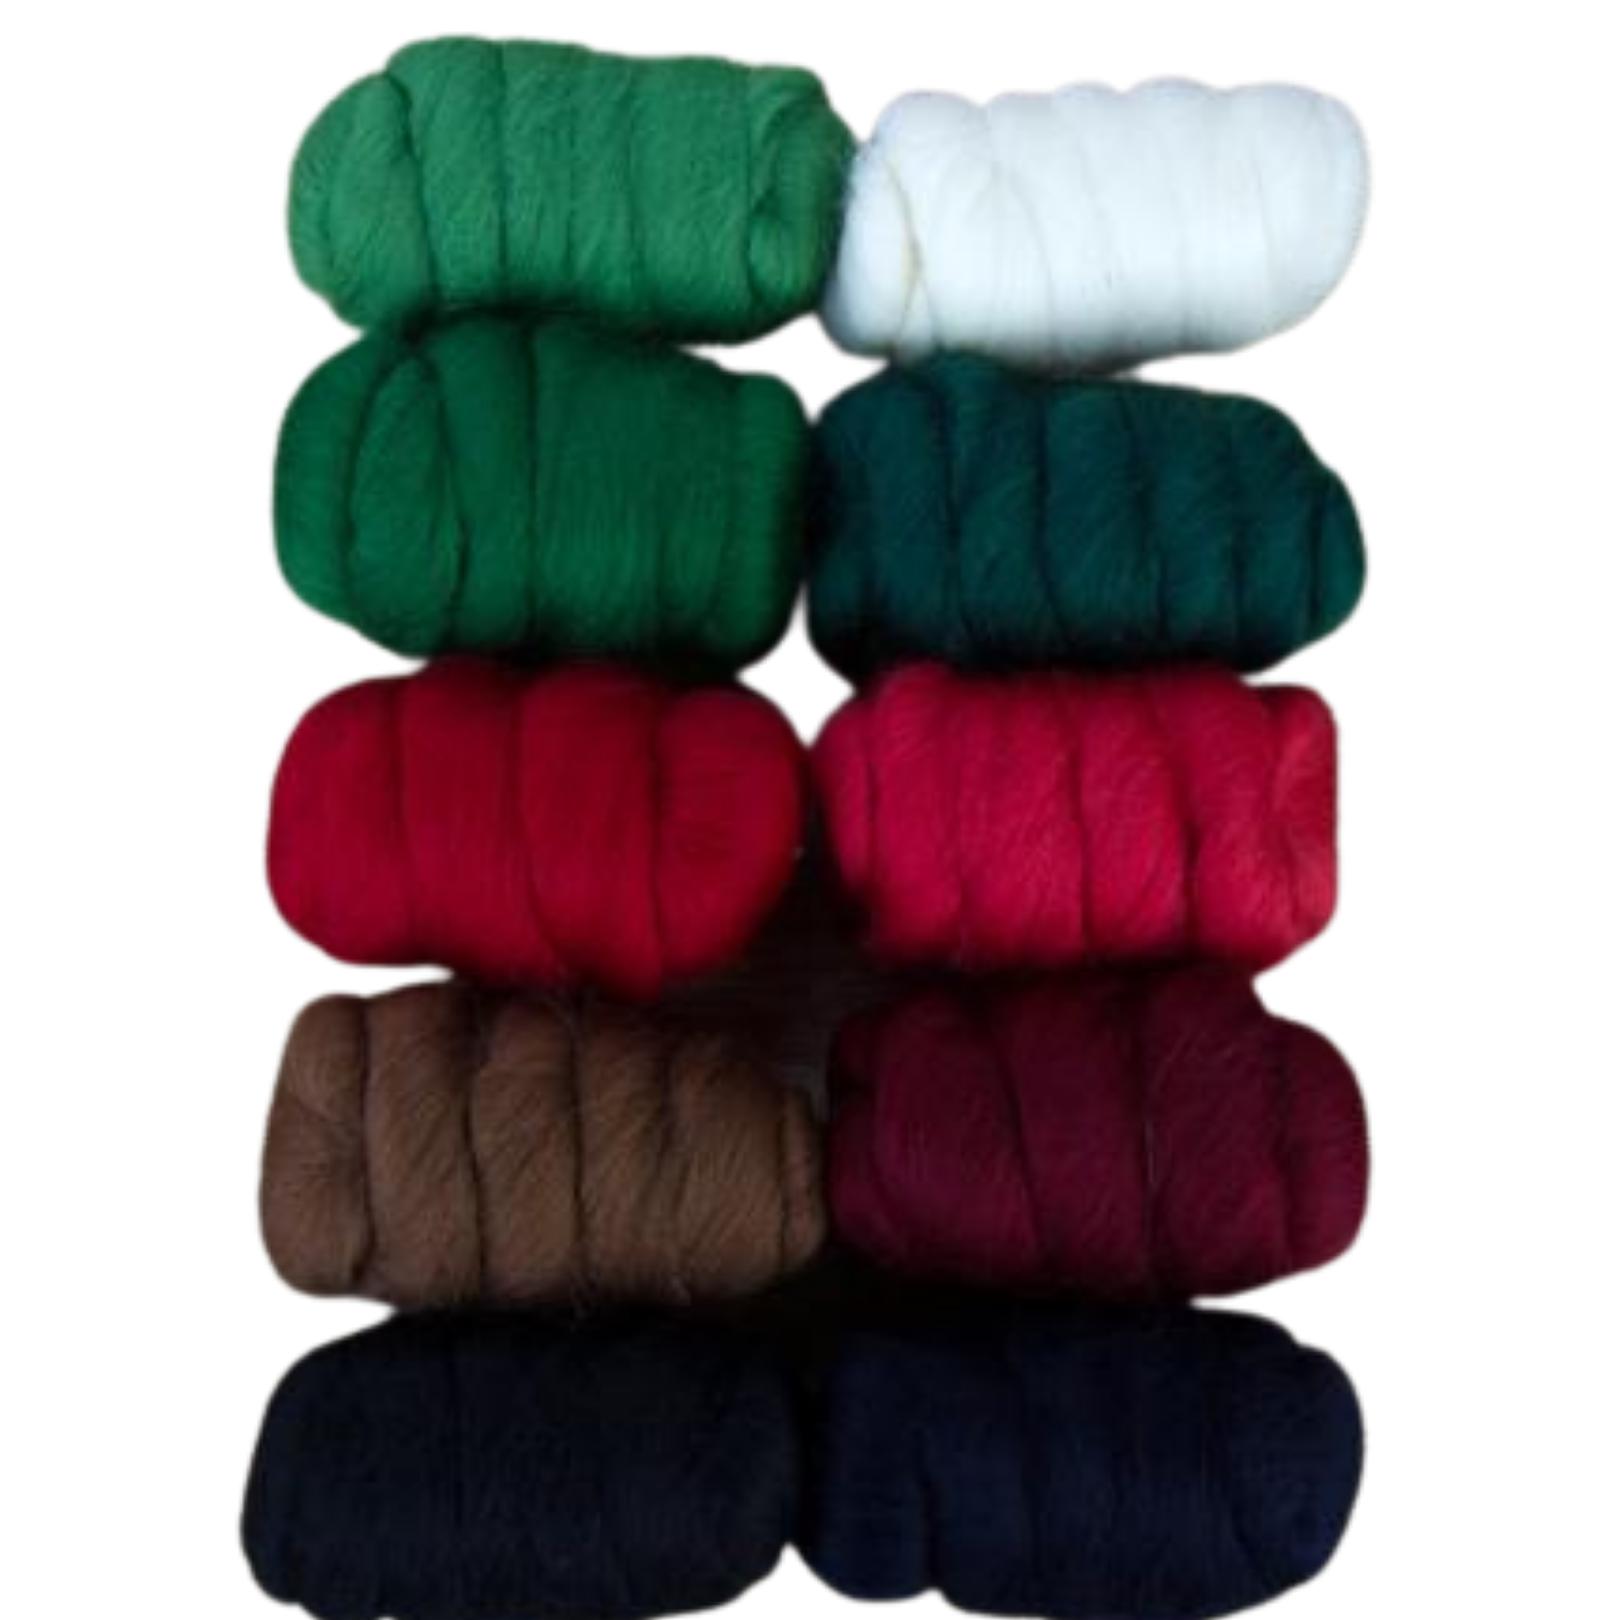 Mixed Merino Wool Variety Pack | Holiday Cheer (Multicolored) 250 Grams, 23 Micron - Textile Indie 